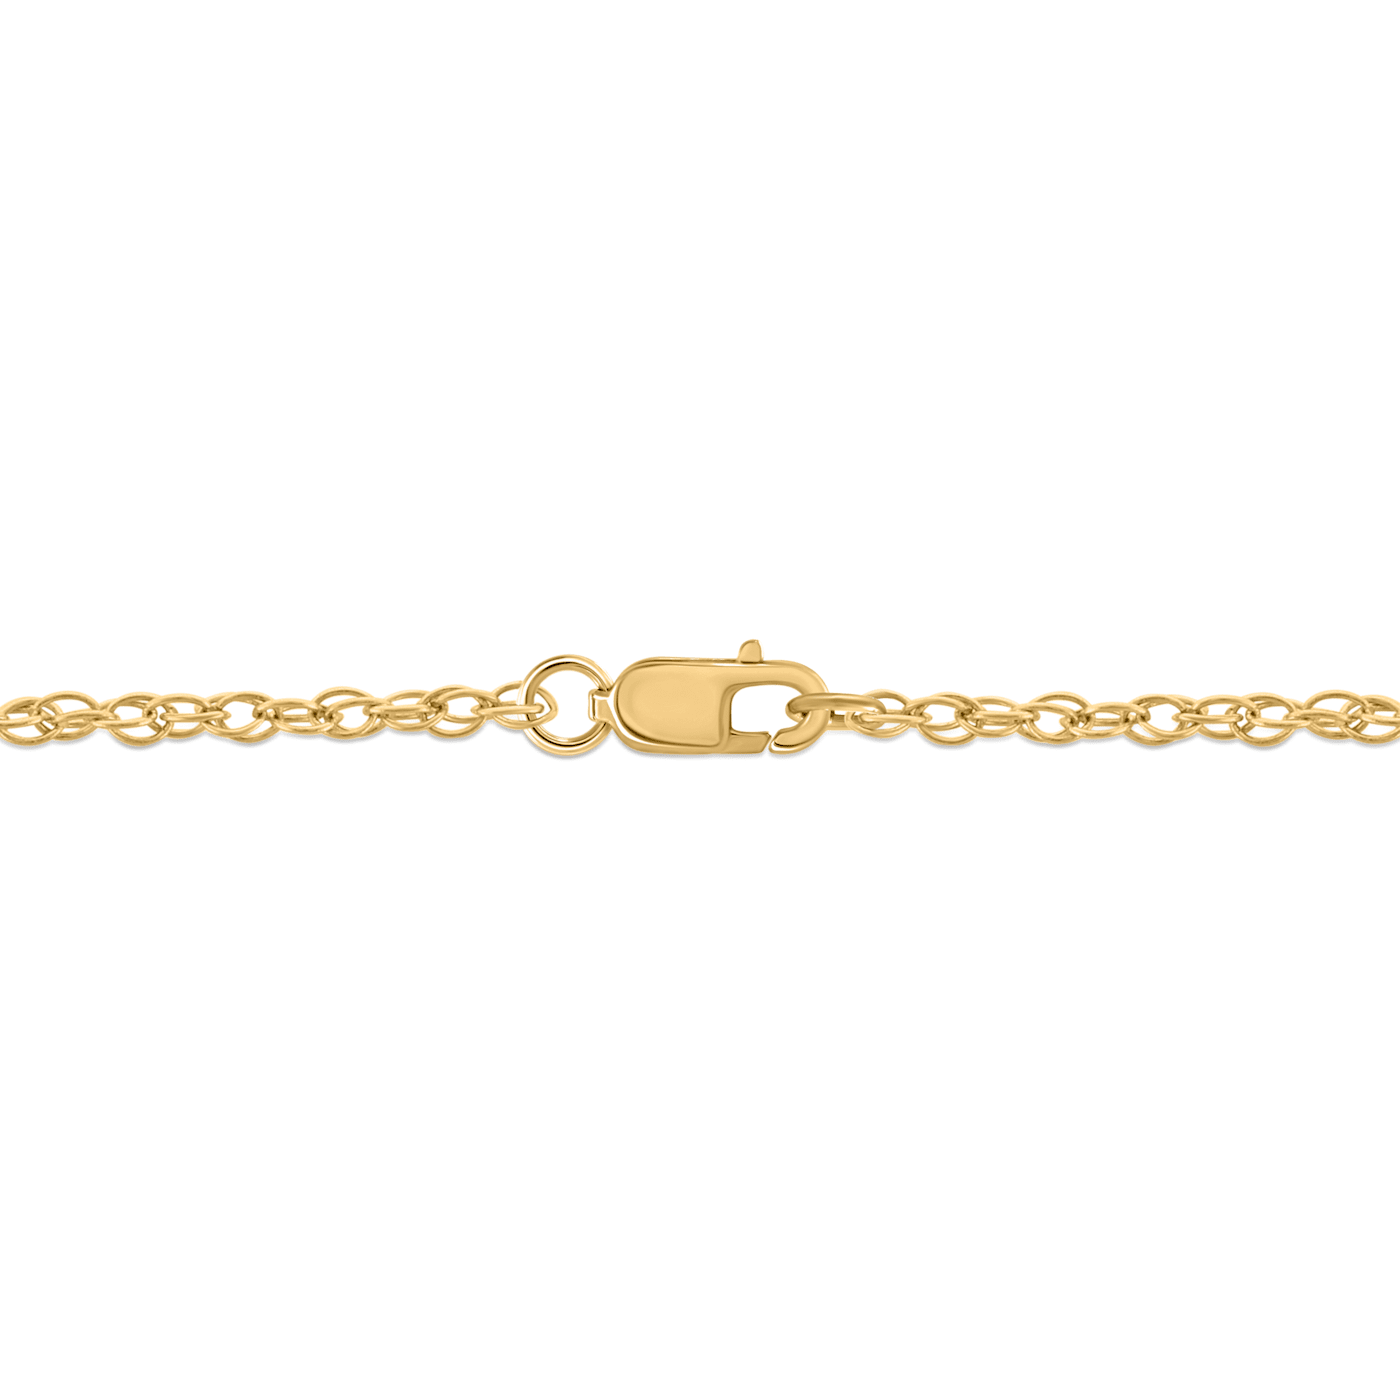 10K Gold Initial Key Necklace - Gold Presidents